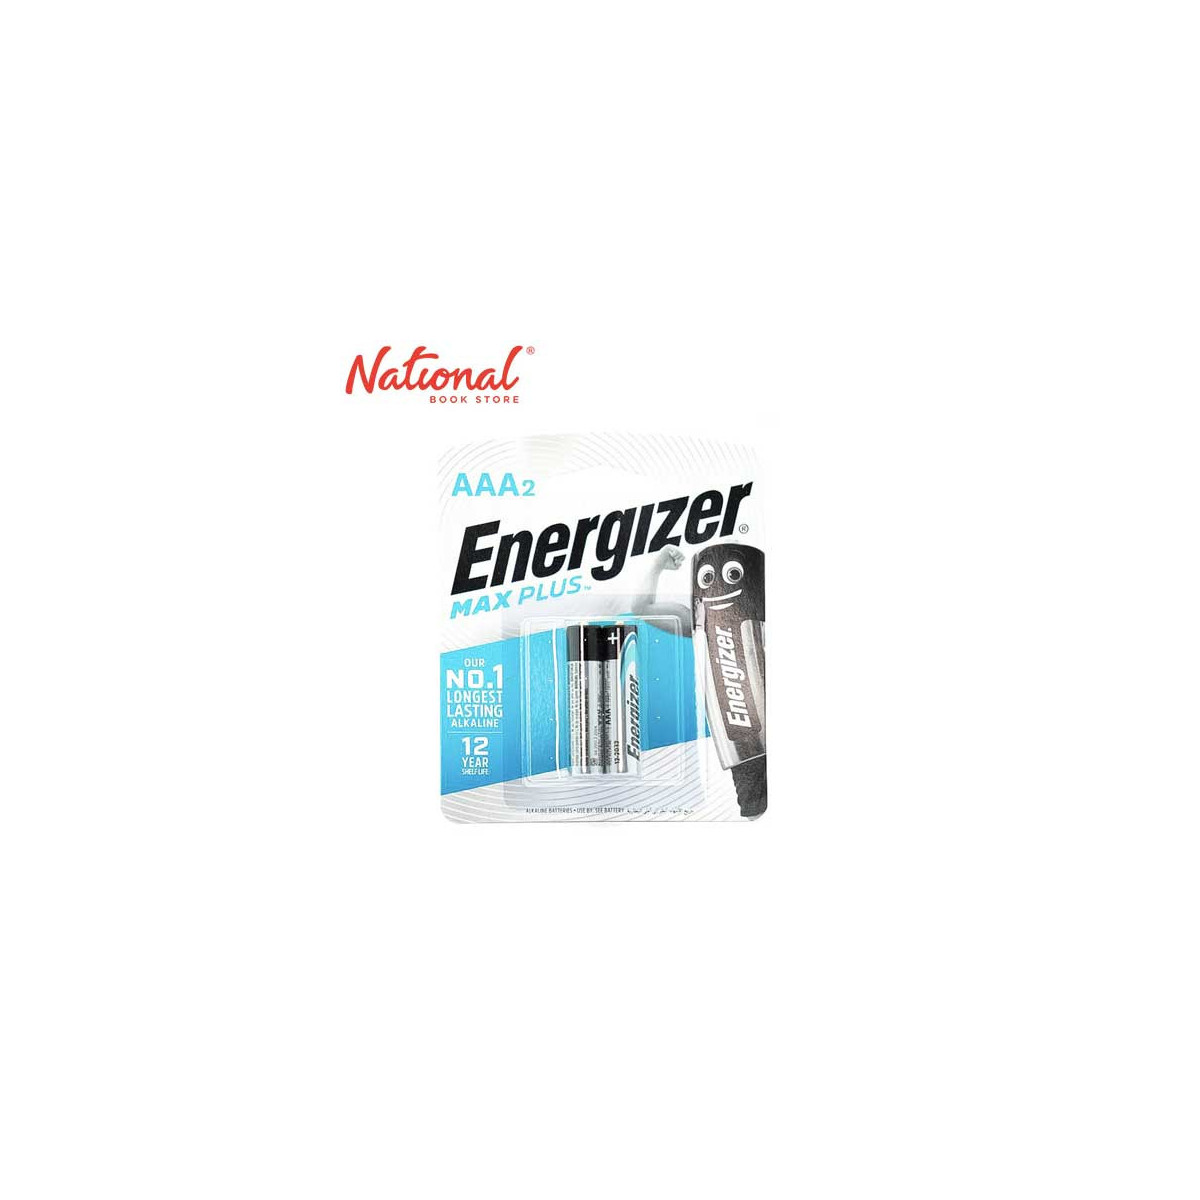 Energizer Battery EP92BP2 Max Plus AA 2s - Office Supplies